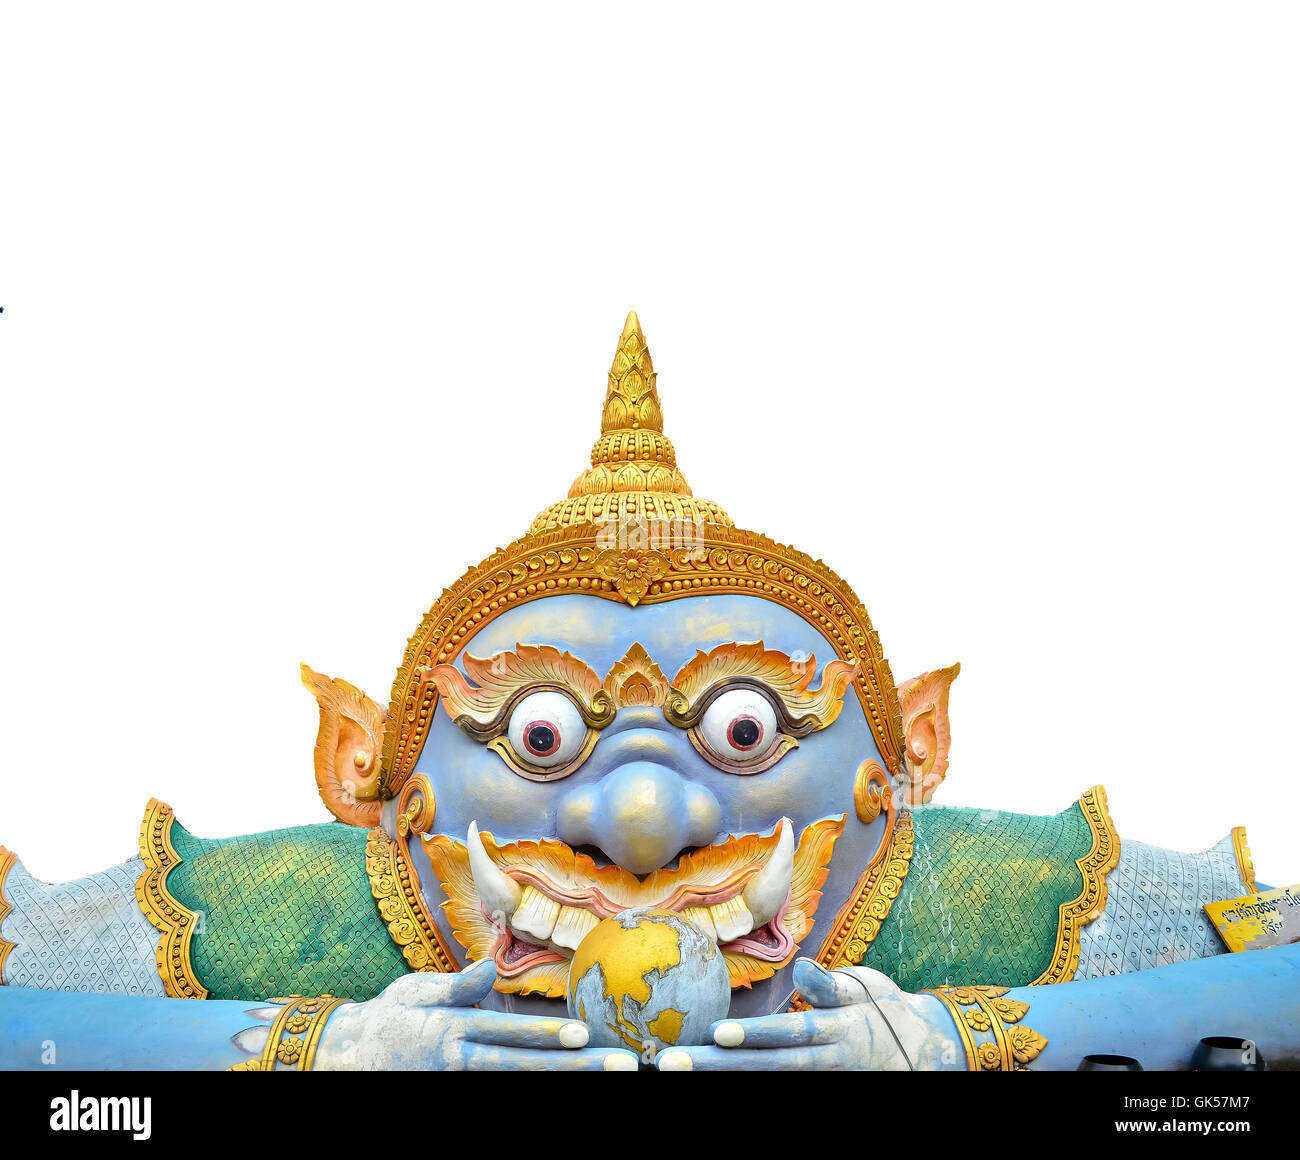 Phra Rahu statue, who is the mythical god of darkness,Thailand. Stock Photo